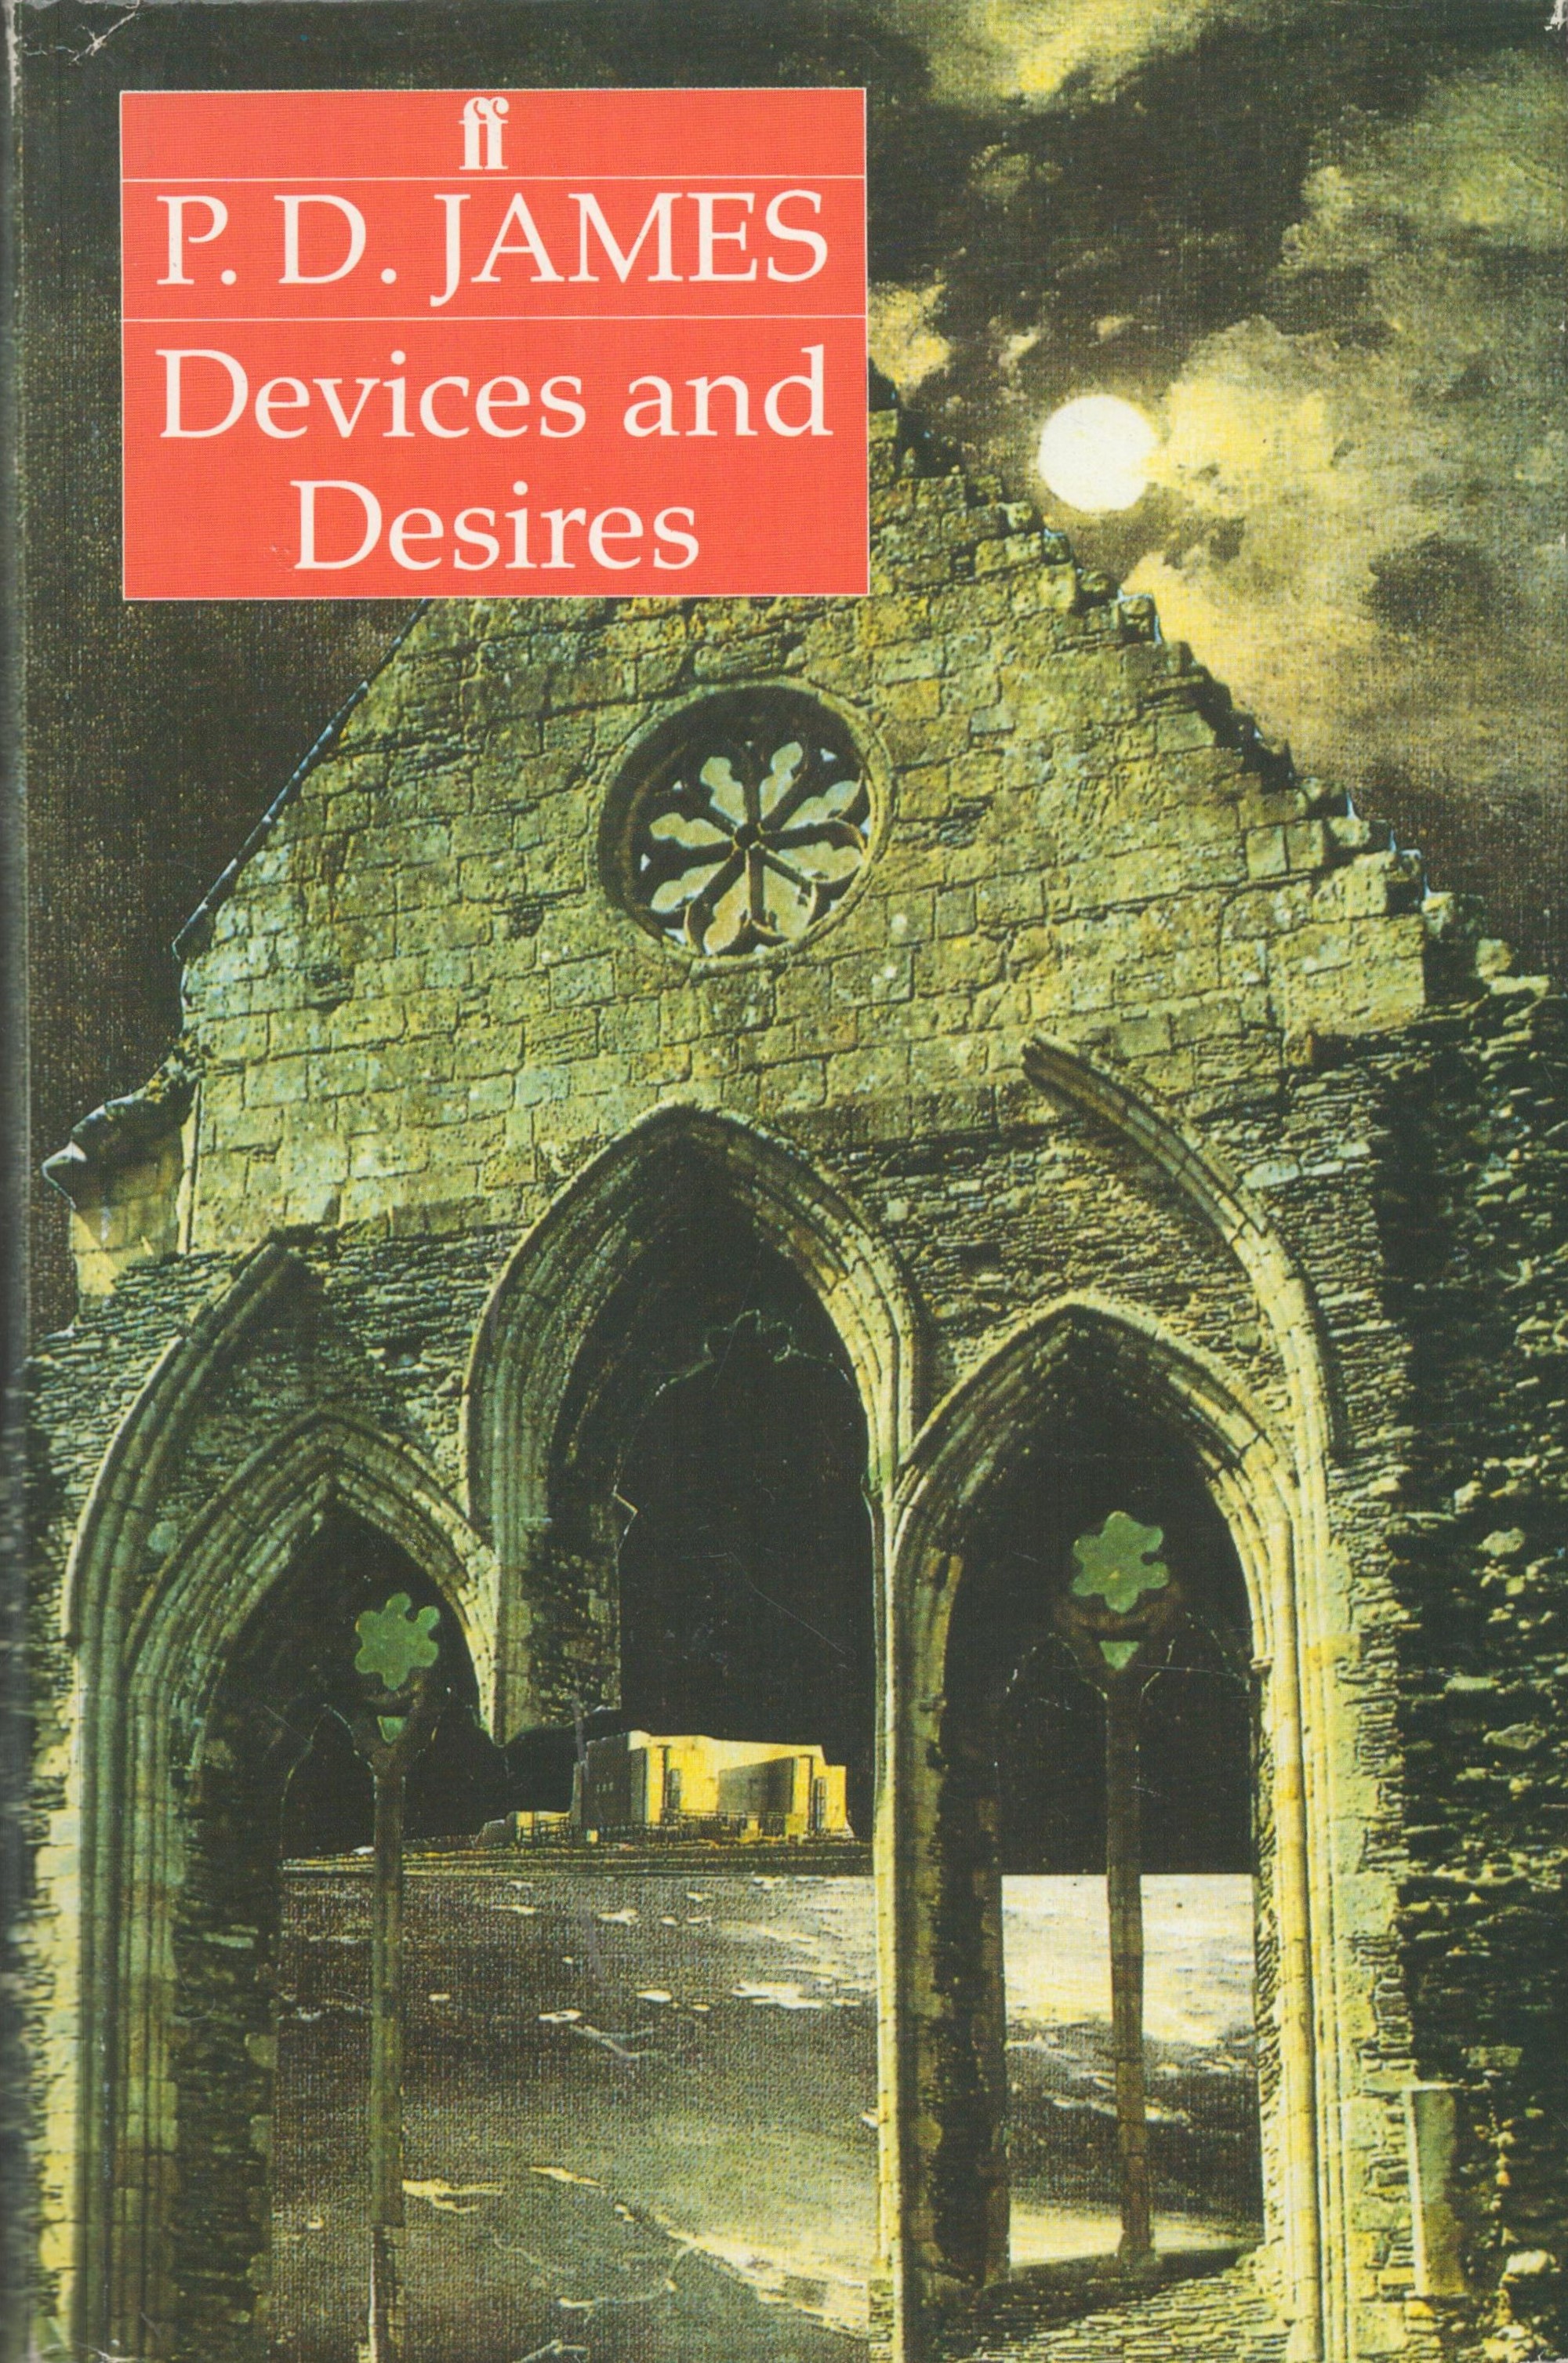 P. D. James Devices and Desires with complete Dust Jacket, Wrapper Hardback 1st Edition 1989 Book.